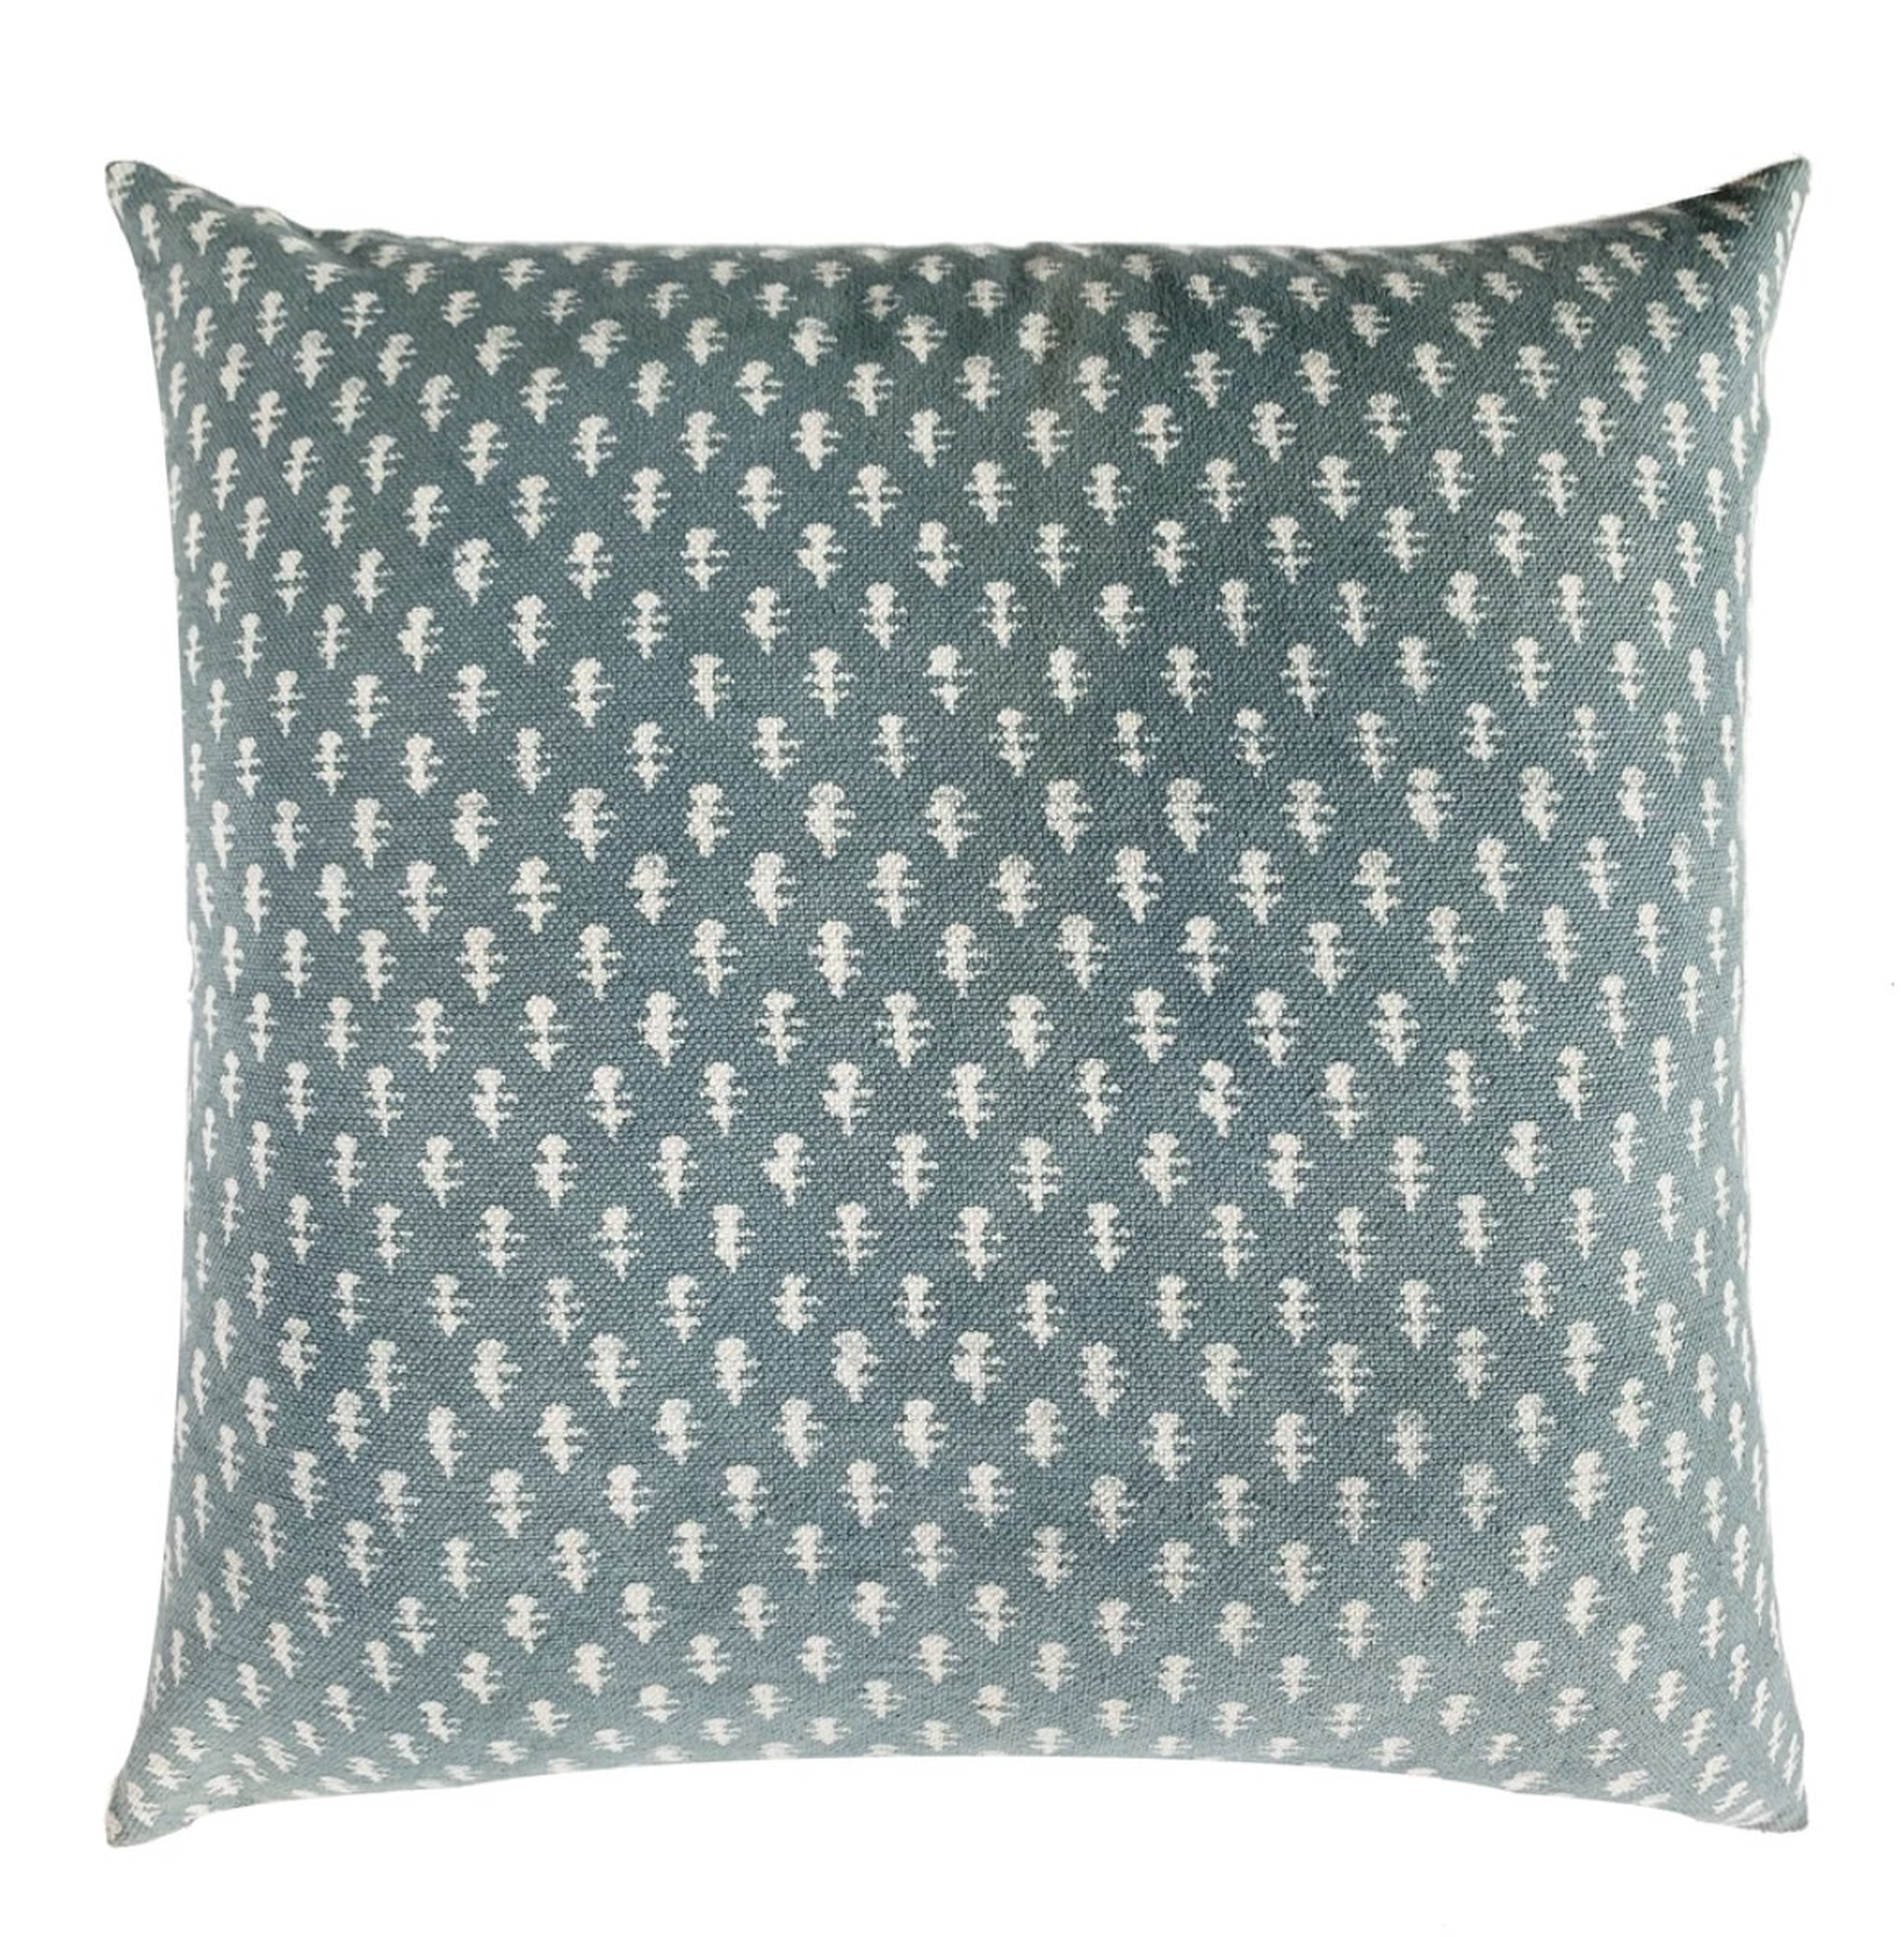 TEAL PATTERNED PILLOW - PillowPia